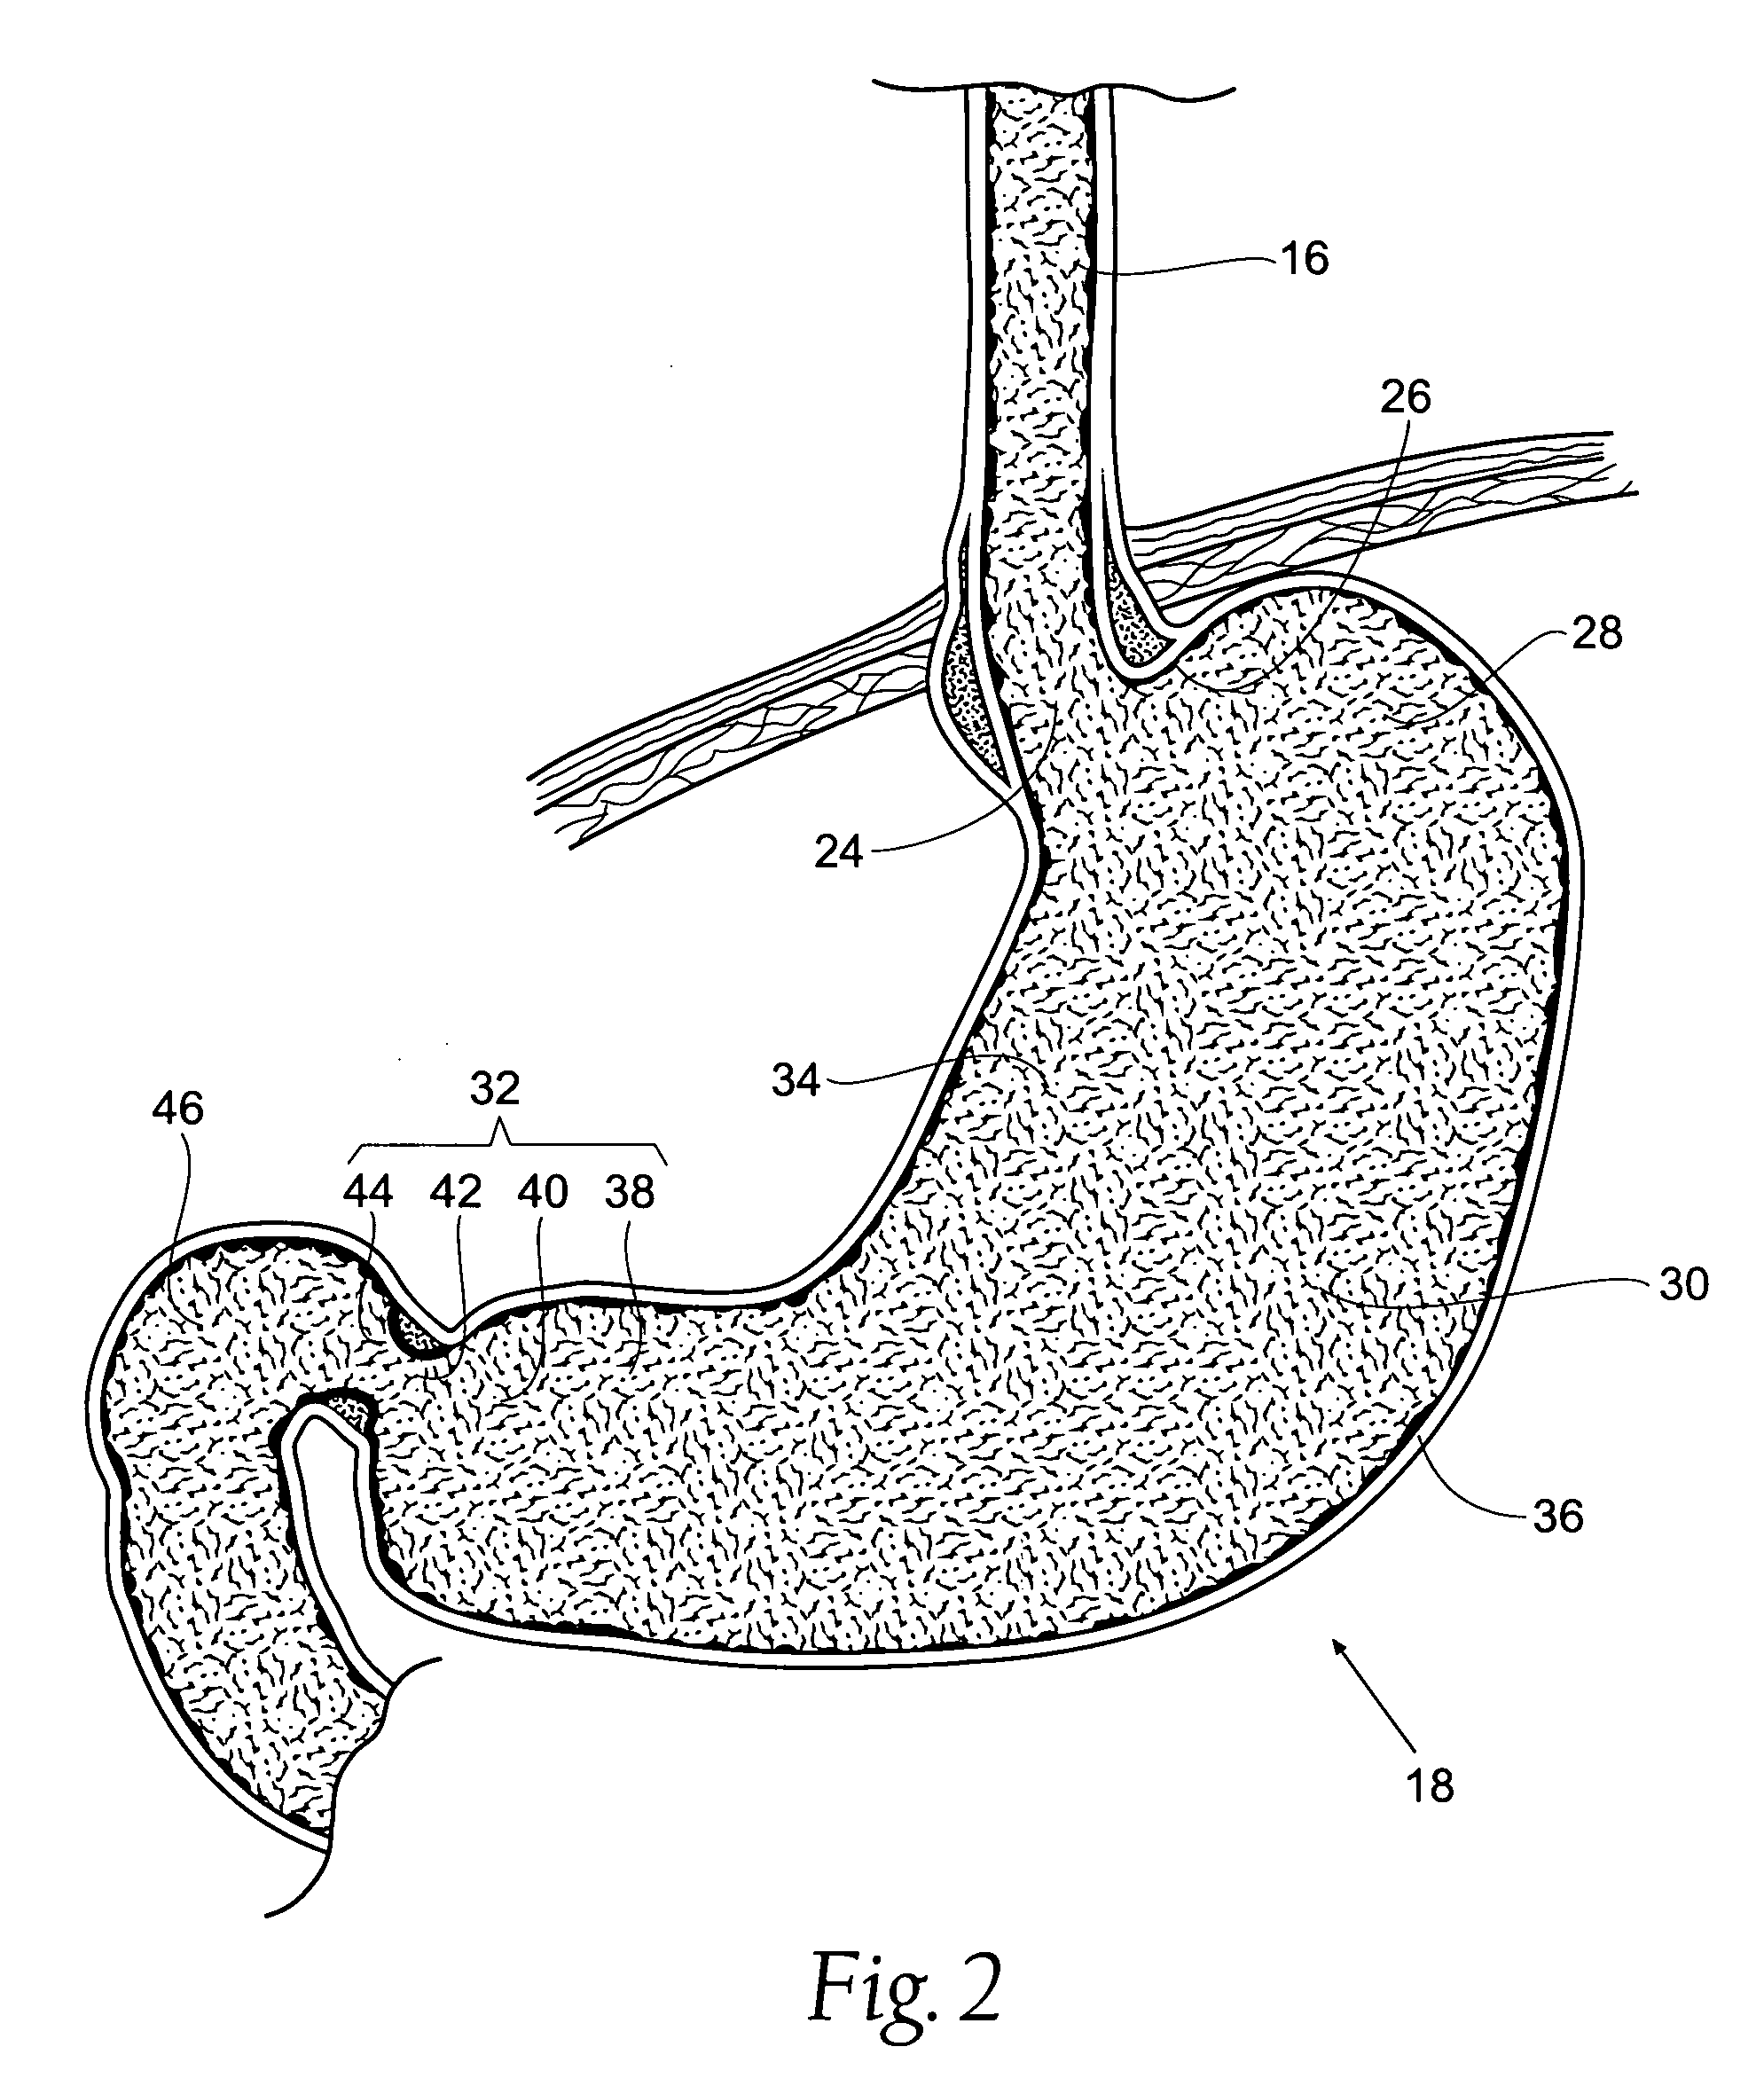 Systems and methods for treating obesity and other gastrointestinal conditions